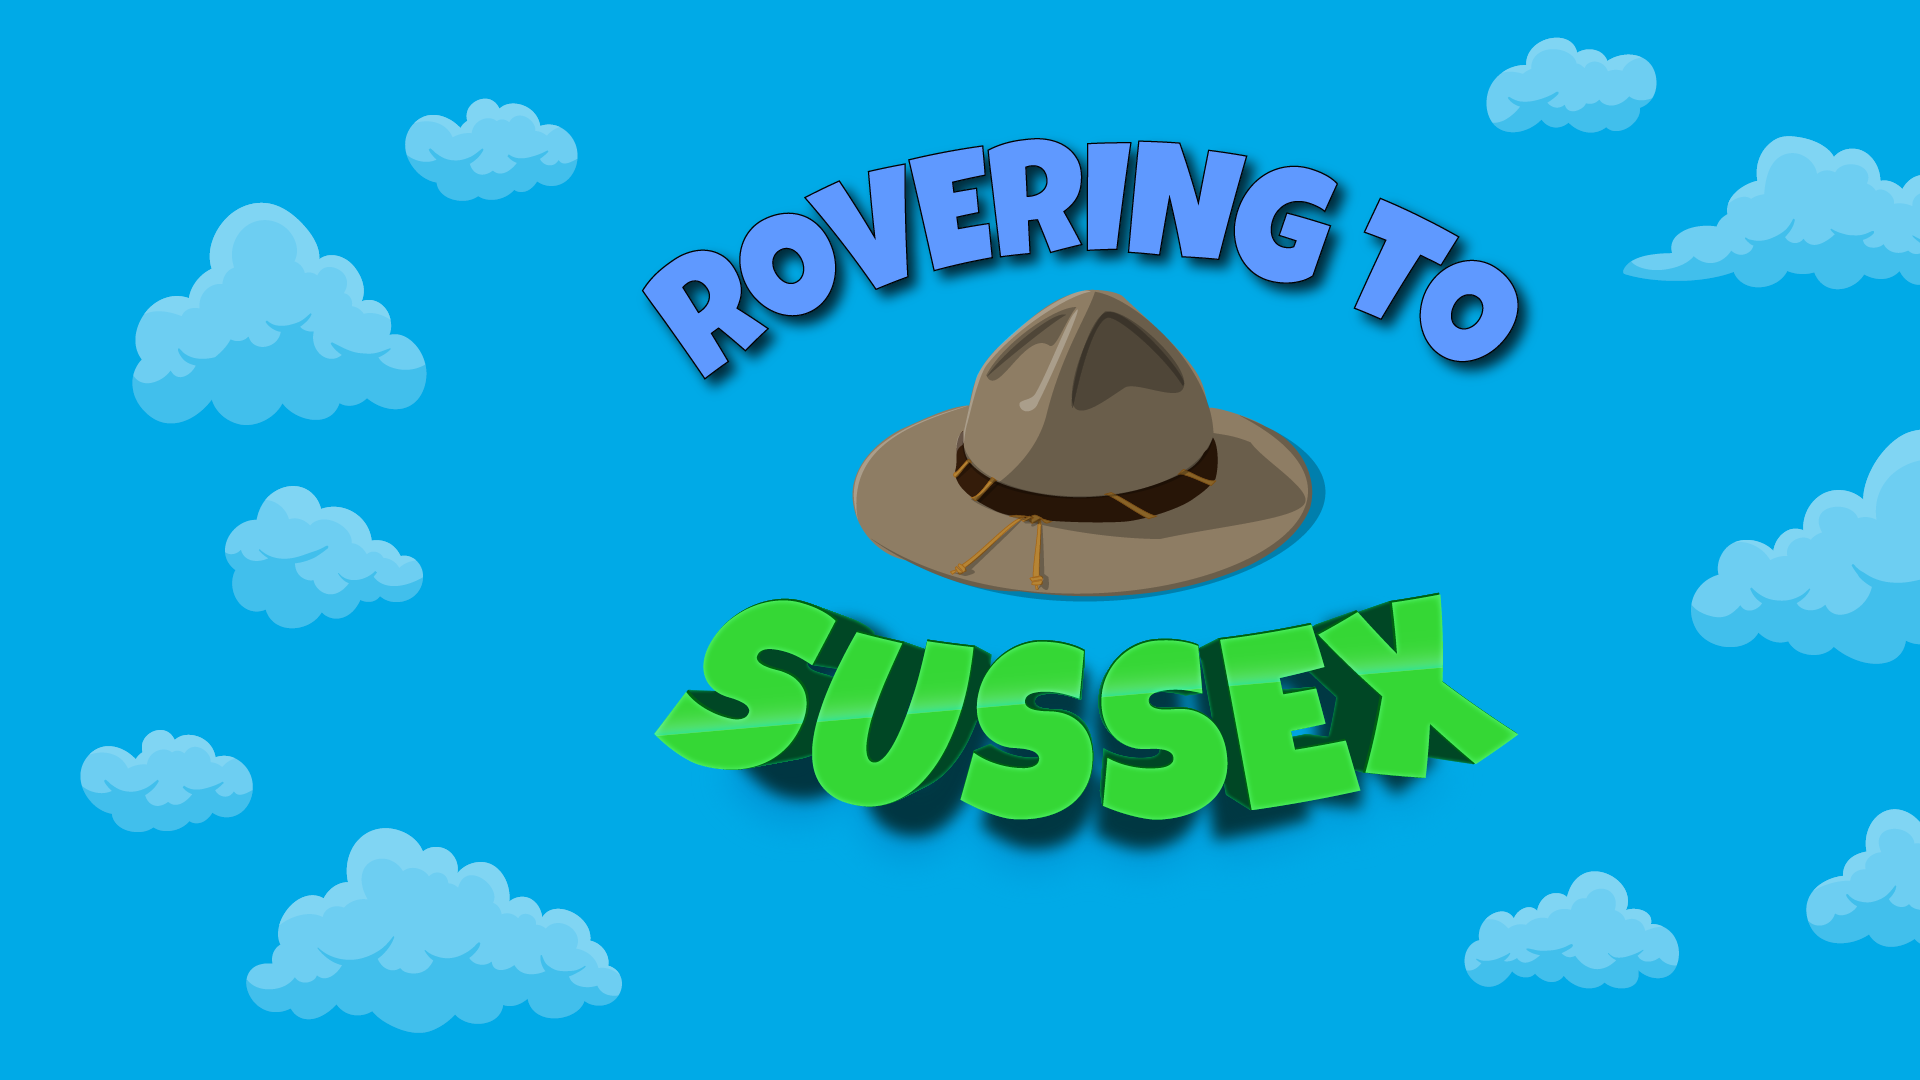 Rovering to Sussex - Chapter 2 v0.2.5 Zargon games & RFB